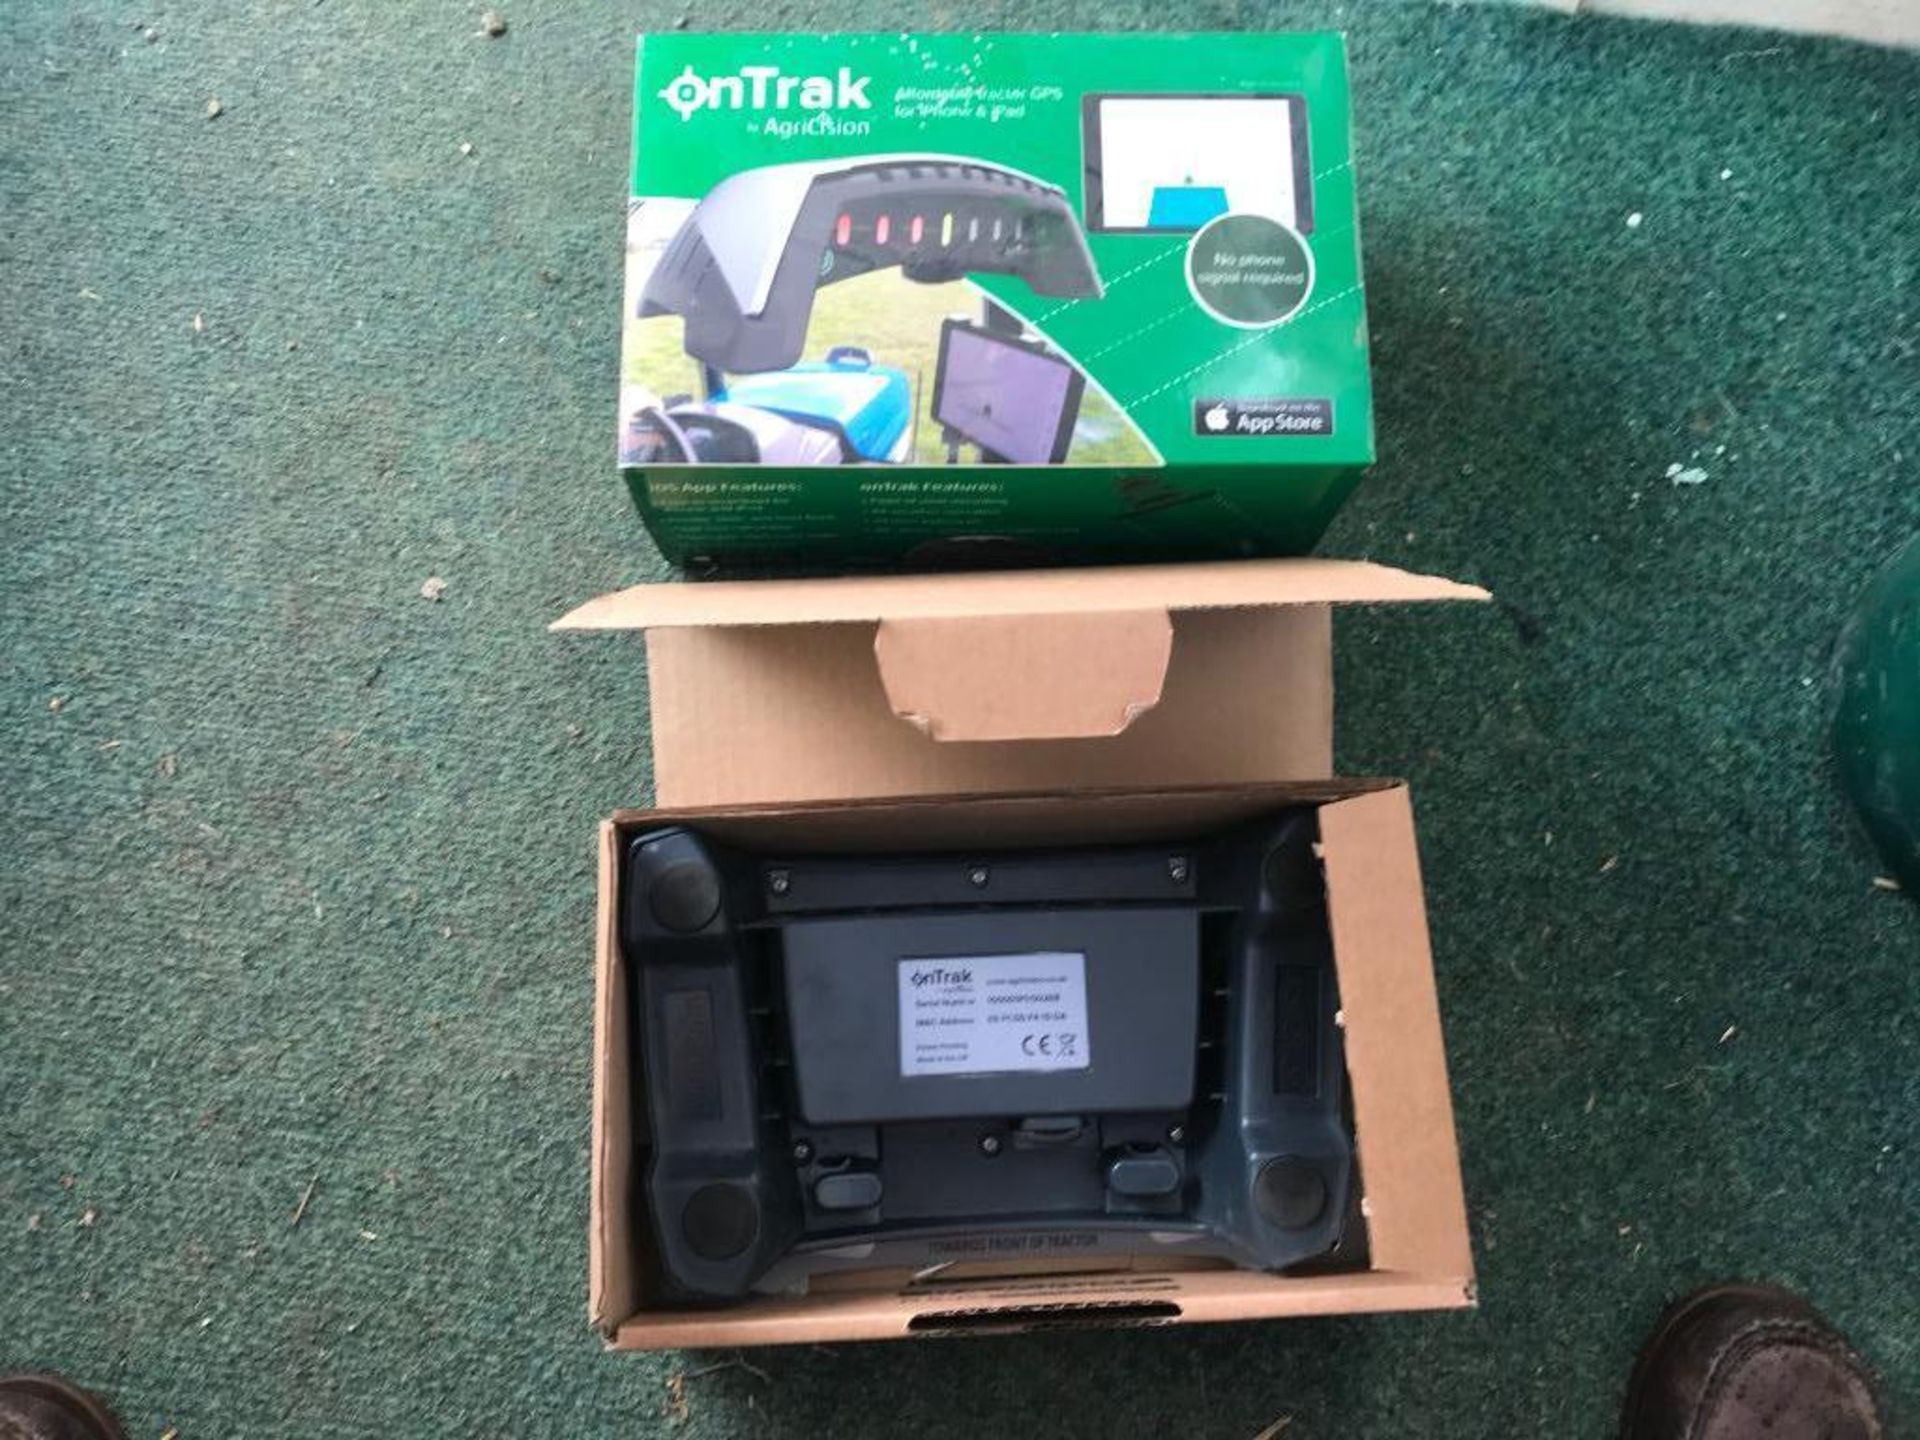 OnTrak GPS system for use with iPhone or iPad